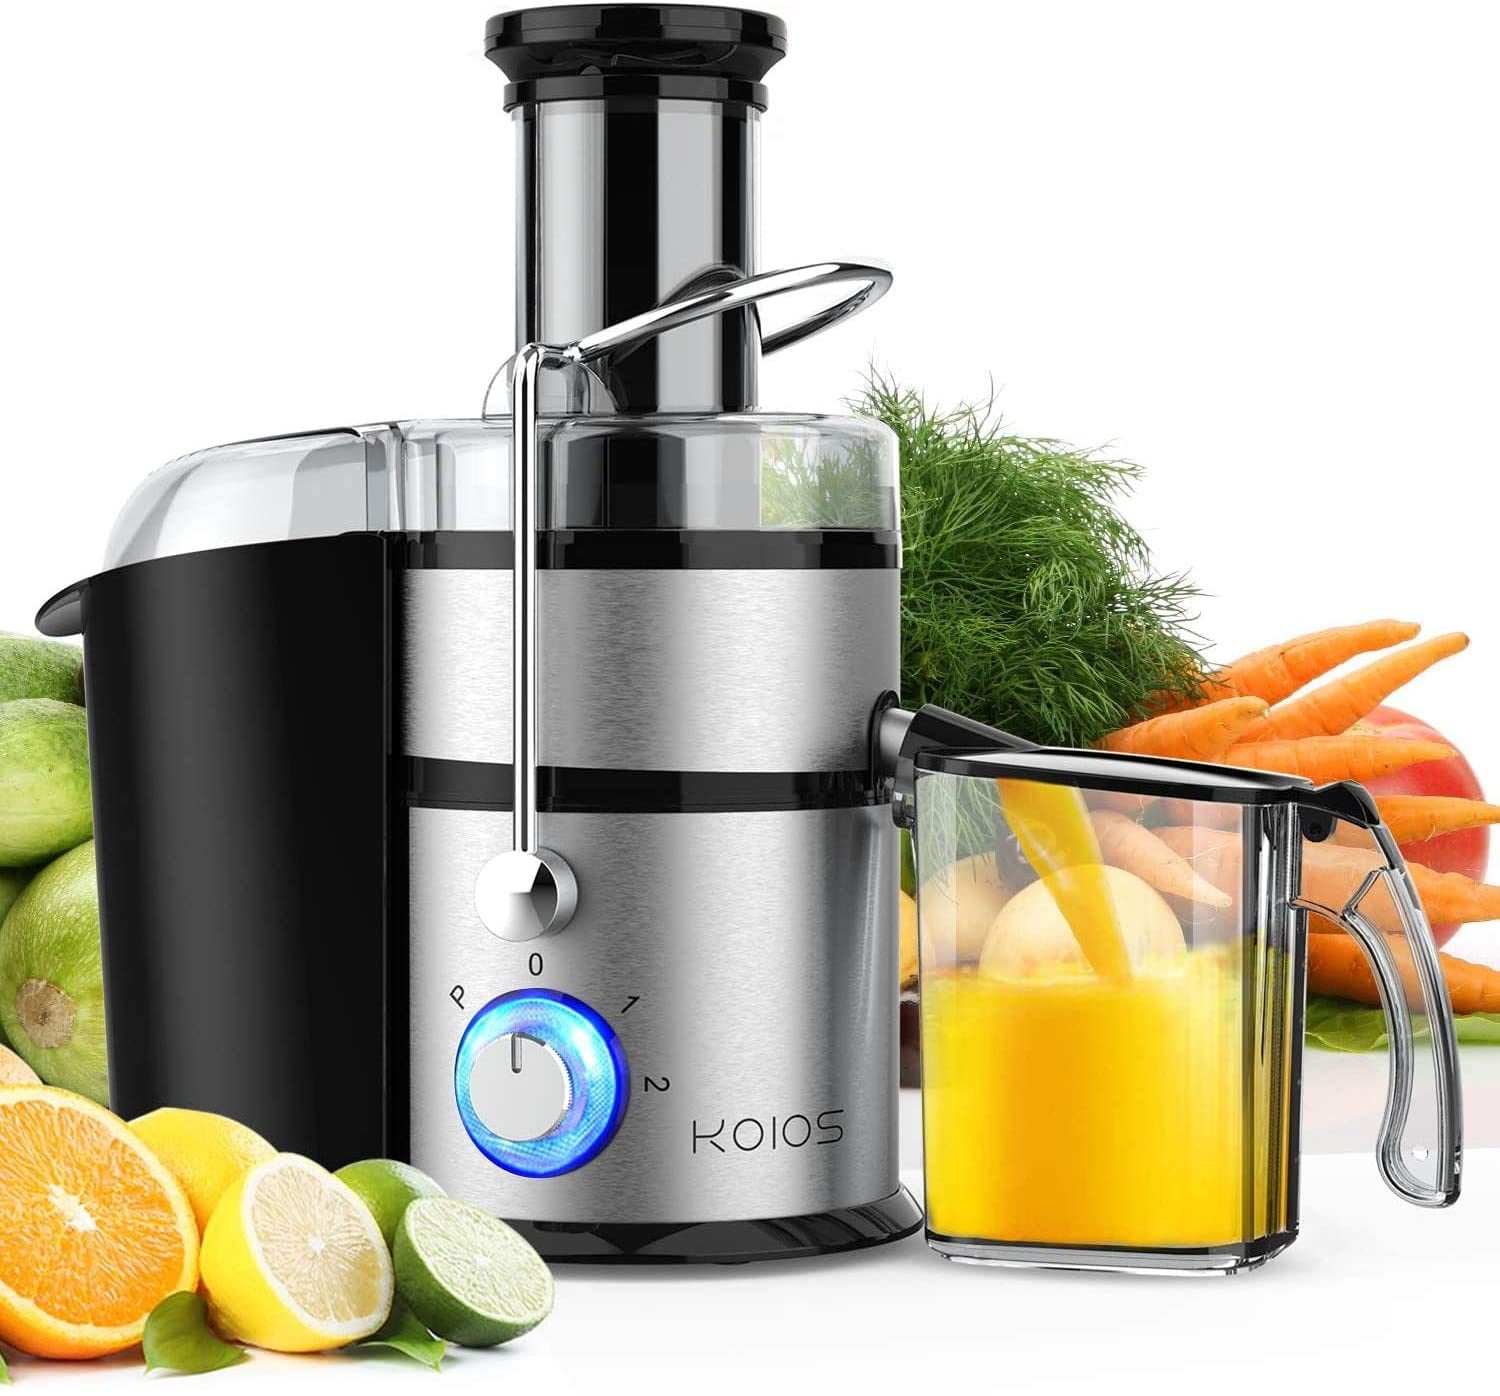 BPA-Free,Dishwasher Safe,Include Brush Juice Extractor,Makoloce Centrifugal Juicer Machines,1200W Juicer Makers Ultra Fast Extract Various Fruit and Vegetable Juice,High Juice Yield,Easy to Clean,Two Speed Control 